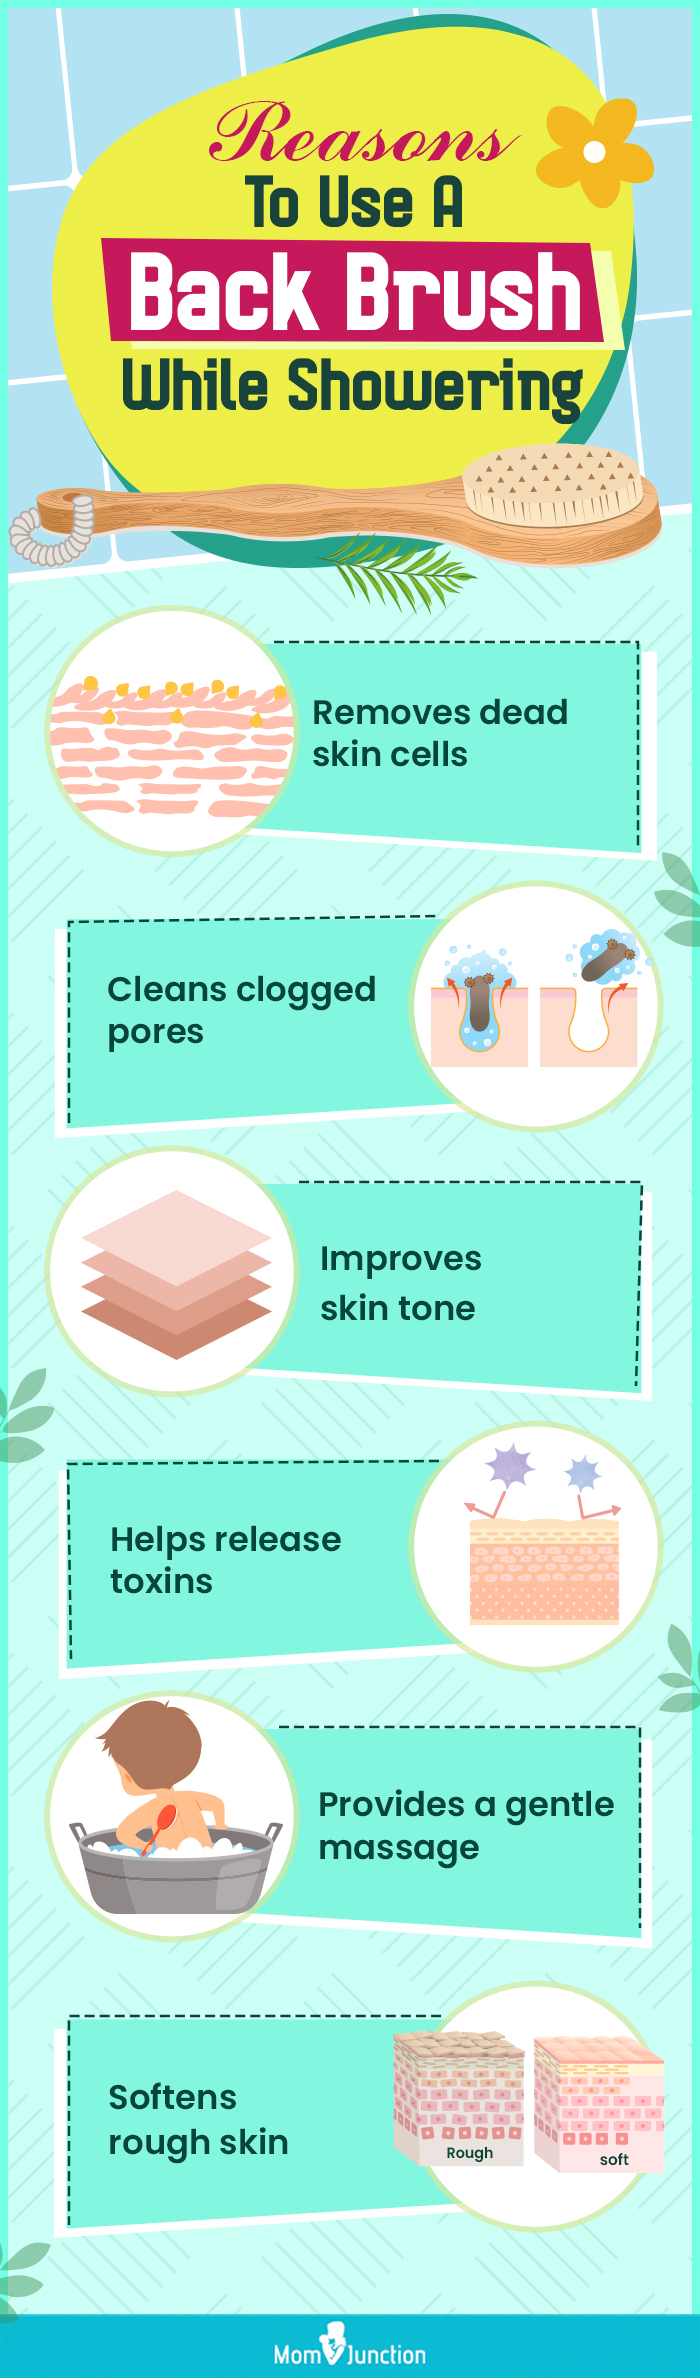 Reasons-To-Use-A-Back-Brush-While-Showering (infographic)